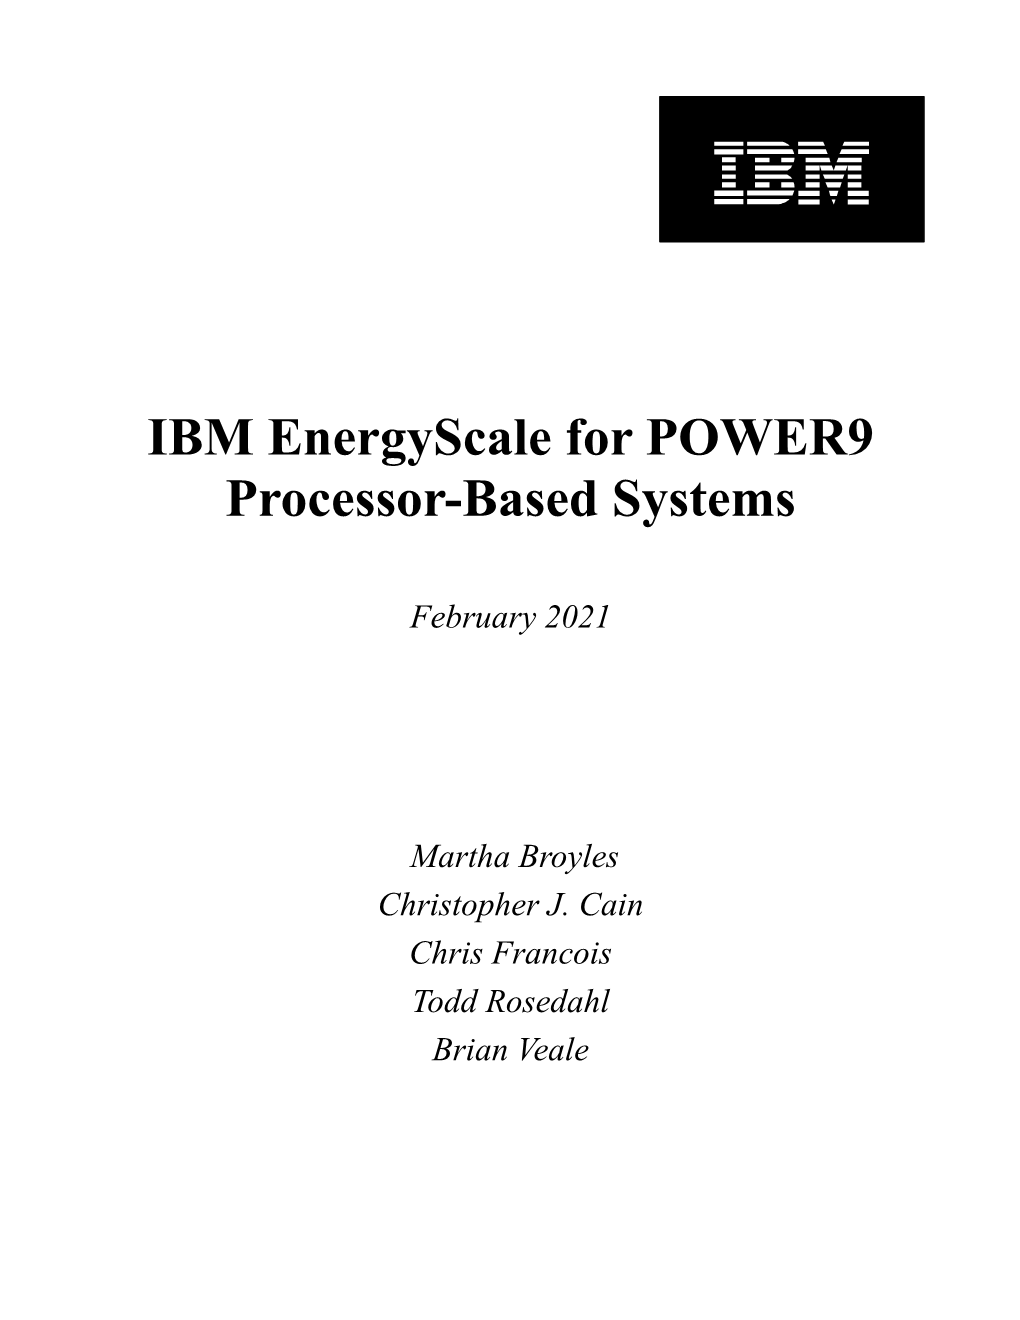 IBM Energyscale for POWER9 Processor-Based Systems